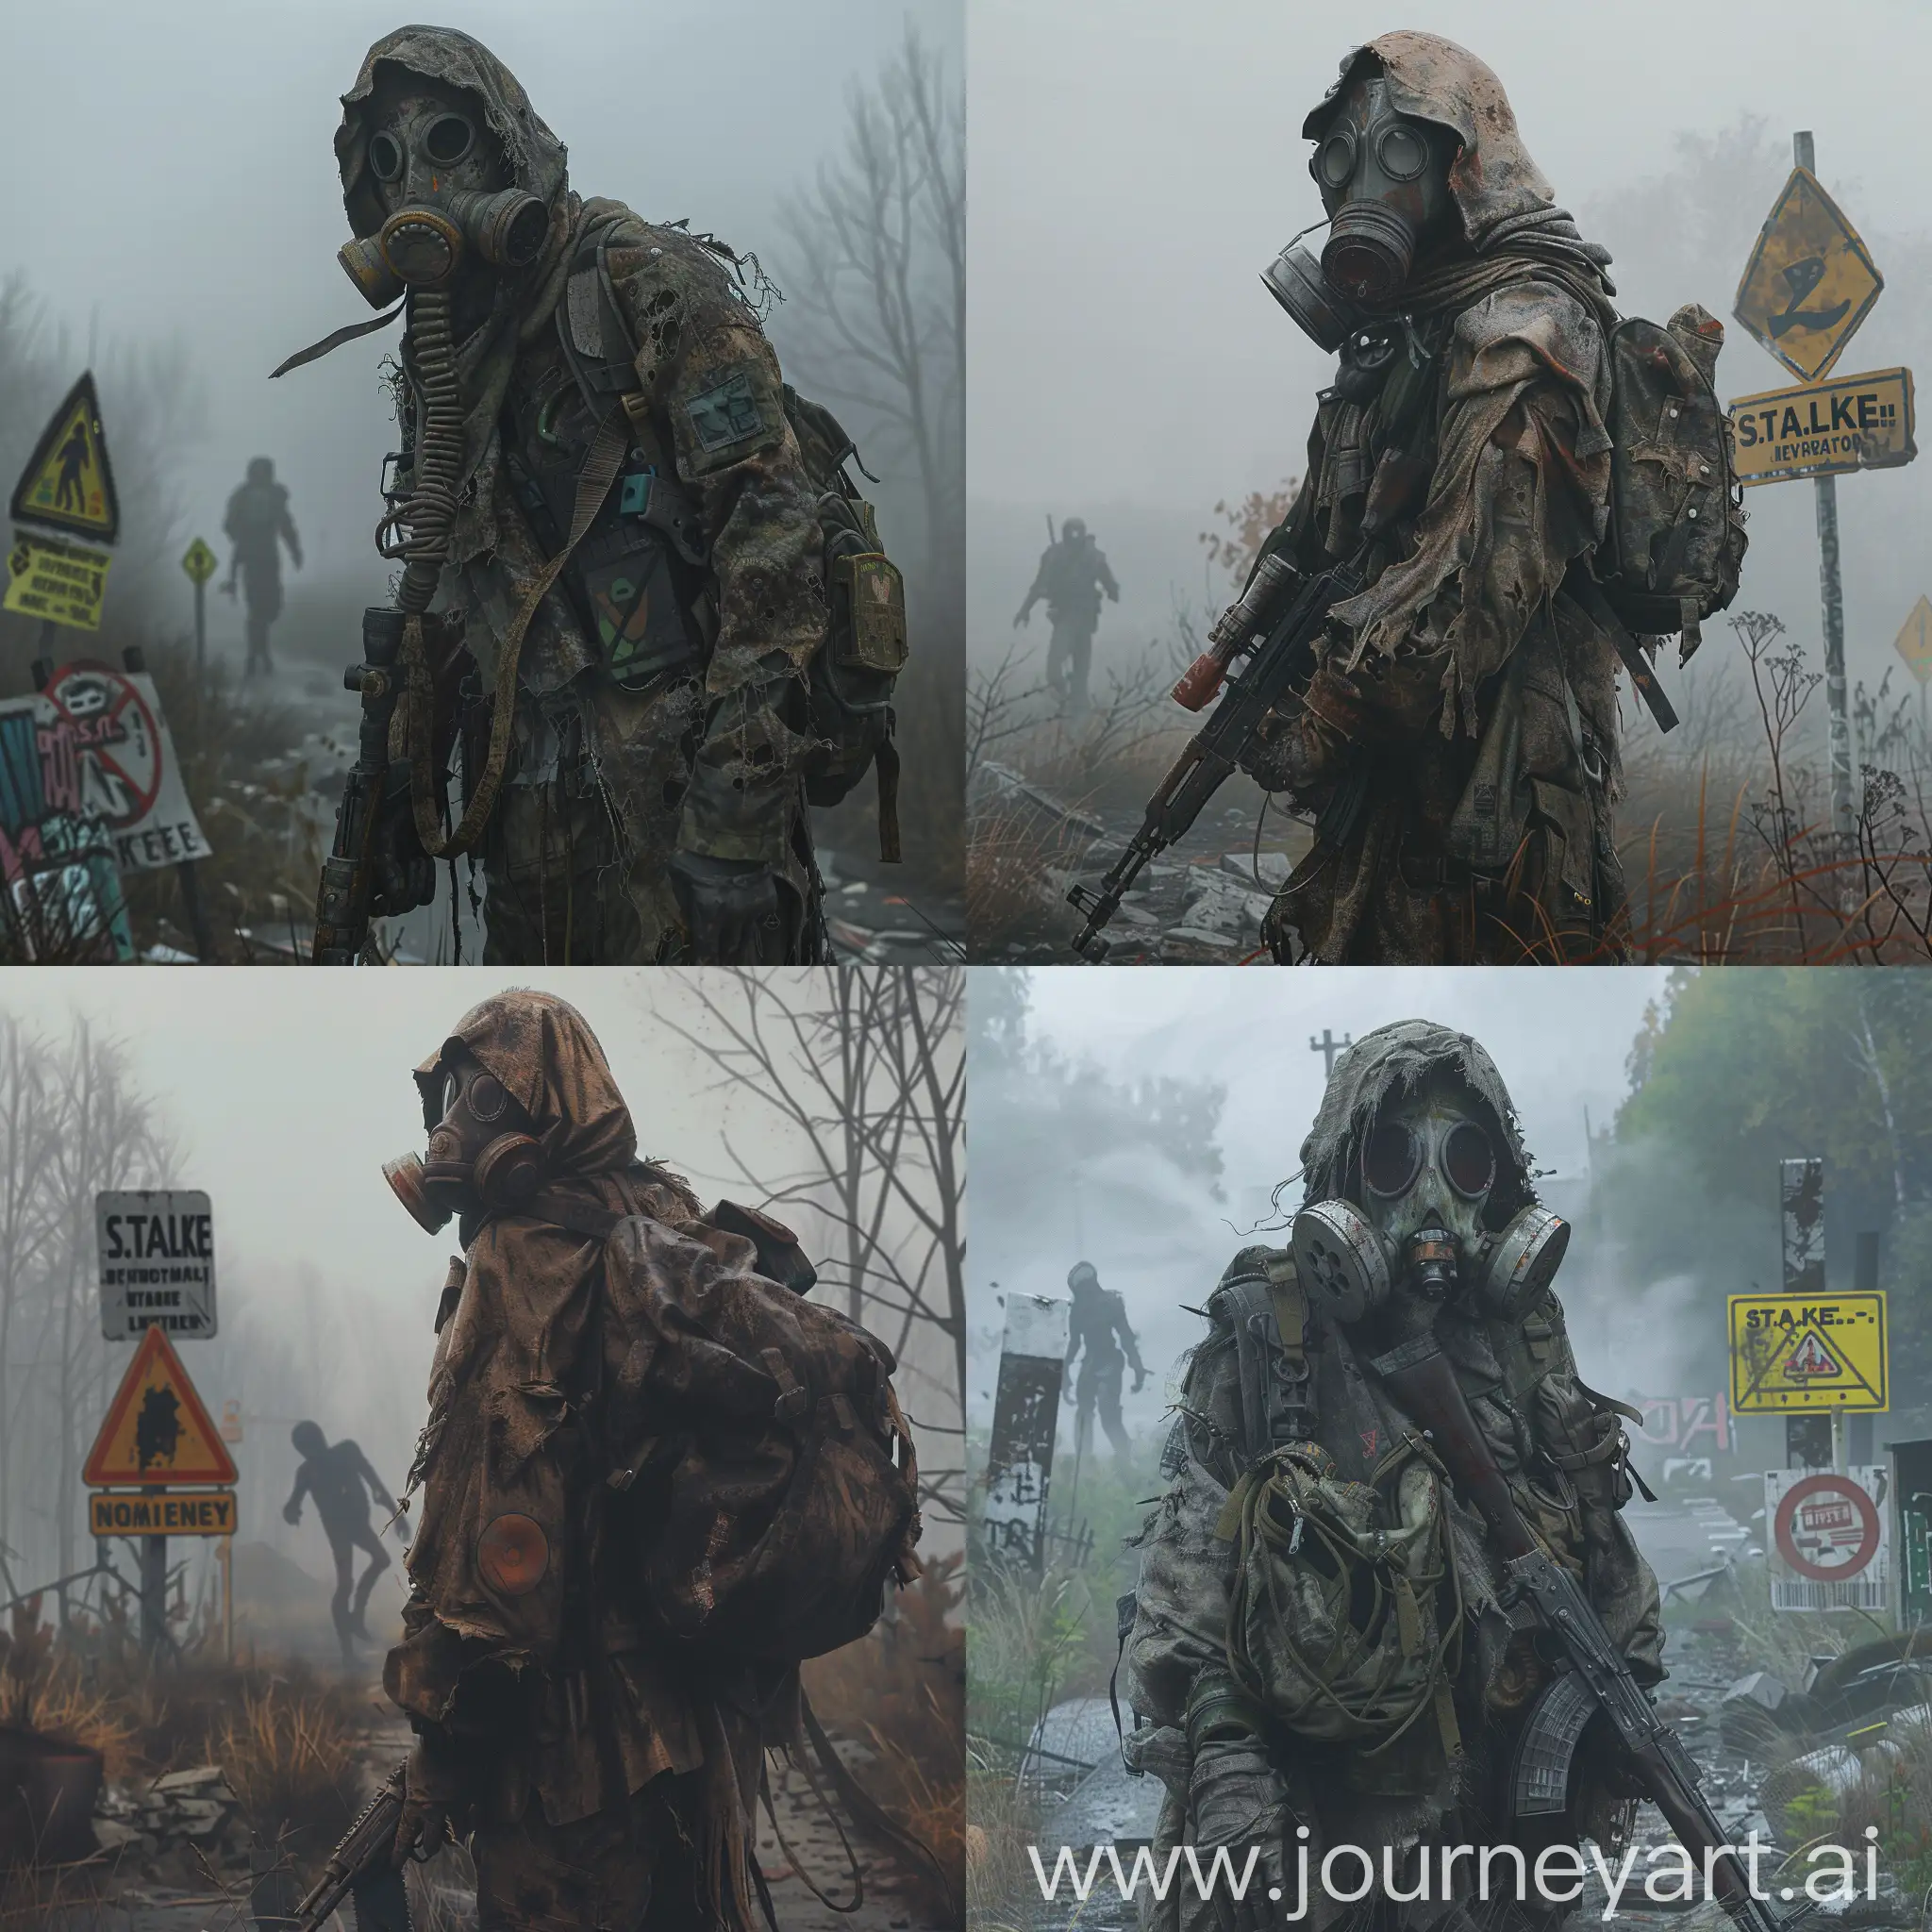 a high quality illustration of a S.T.A.L.K.E.R. The stalker is wearing a gas mask, tattered clothing, and carrying a rifle. The scene is set during a foggy, overcast day, with eerie lighting casting shadows. Show signs of danger like warning signs, scattered artifacts, and distant mutant silhouettes. Capture the essence of survival horror, desolation, and tension in the atmosphere. Include details like cracked gas masks, rusted weapons, and graffiti-covered walls. Render in a dark, gritty style reminiscent of the iconic game, emphasizing the feeling of isolation and dread. Ensure high level of detail in the environment, textures, and character design. Ideal for fans of the S.T.A.L.K.E.R. series and post-apocalyptic settings.